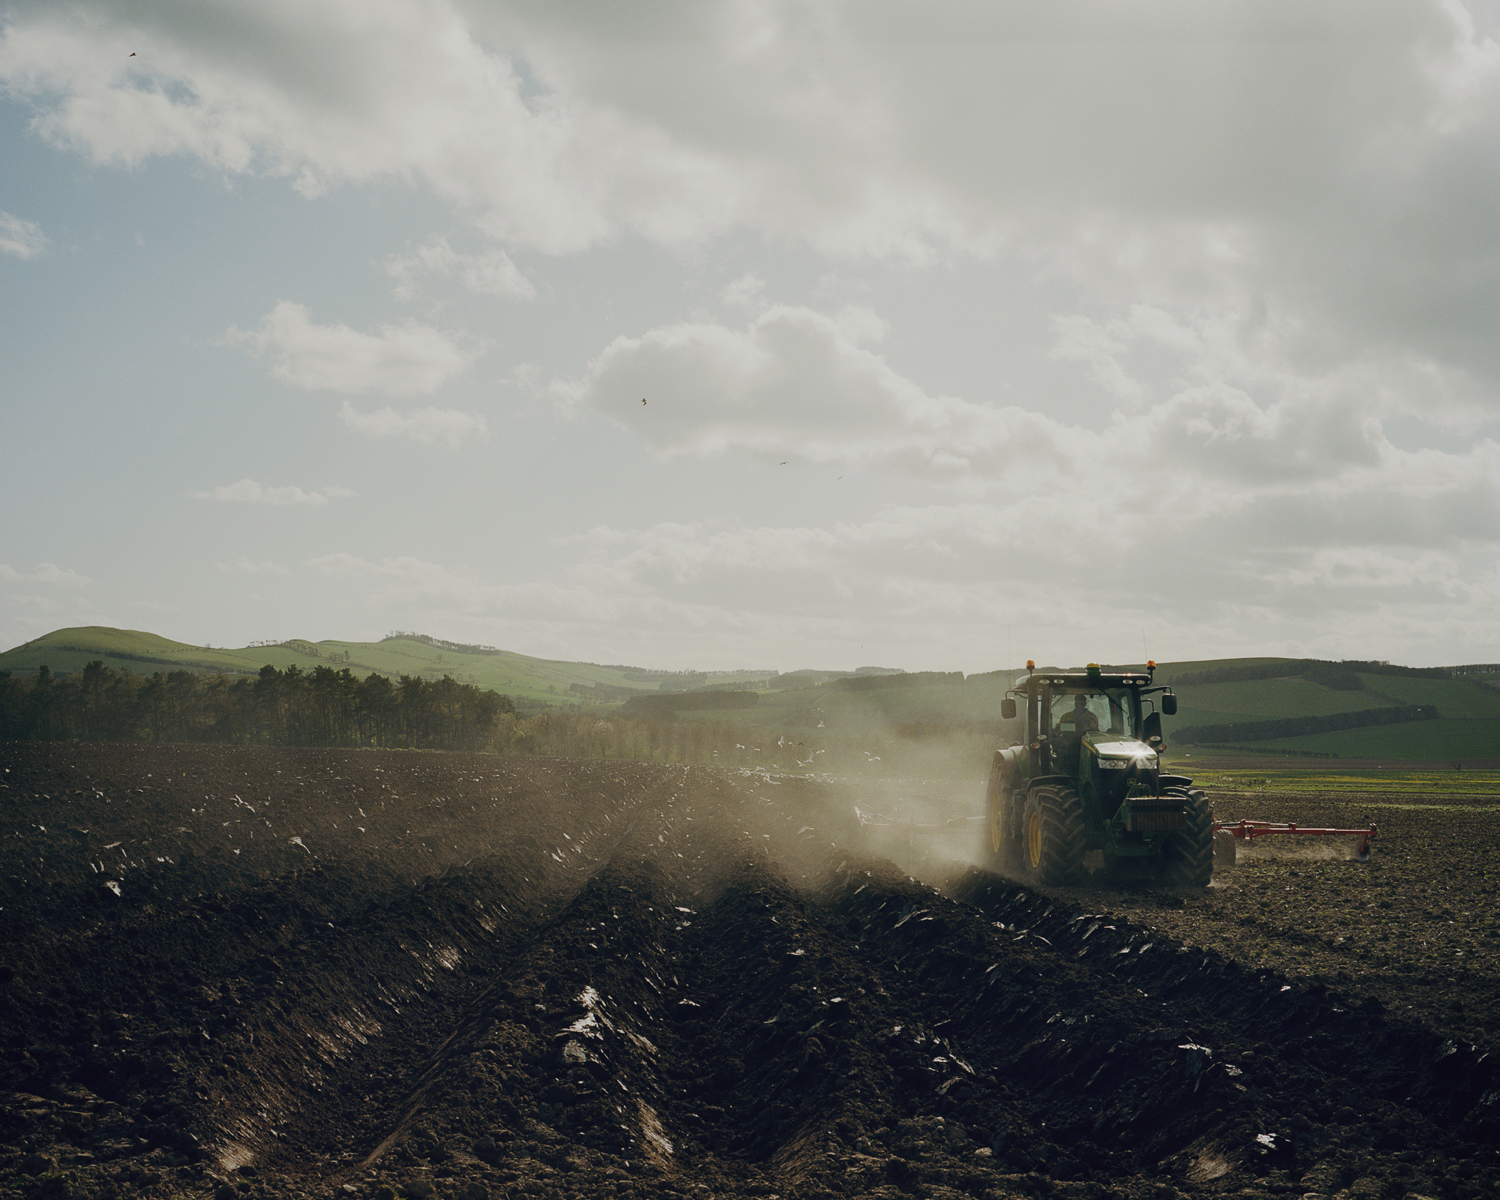 A farmer ploughing the land, Northumberland, England.